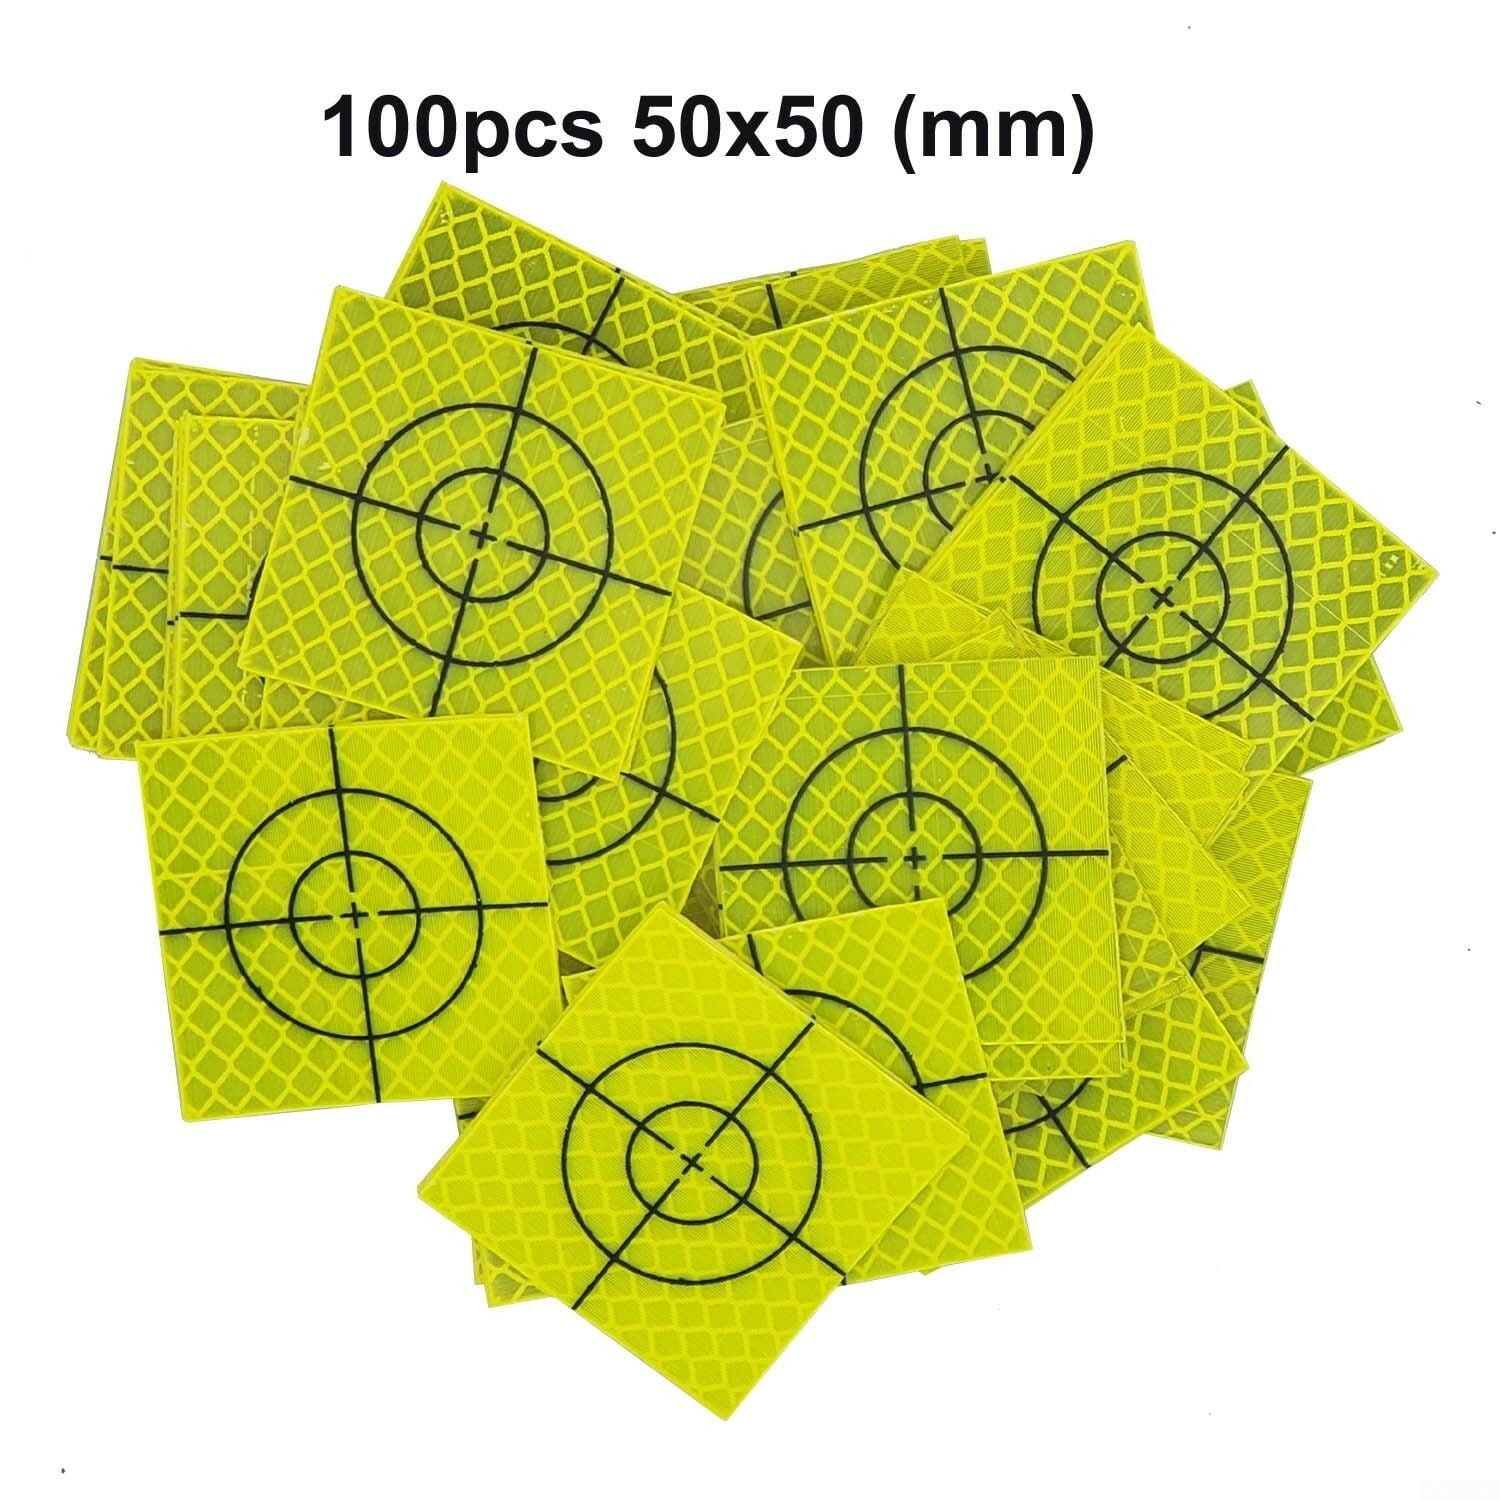 100PCS YELLOW REFLECTOR SHEET 30X30MM REFLECTIVE TARGET FOR TOTAL STATION 